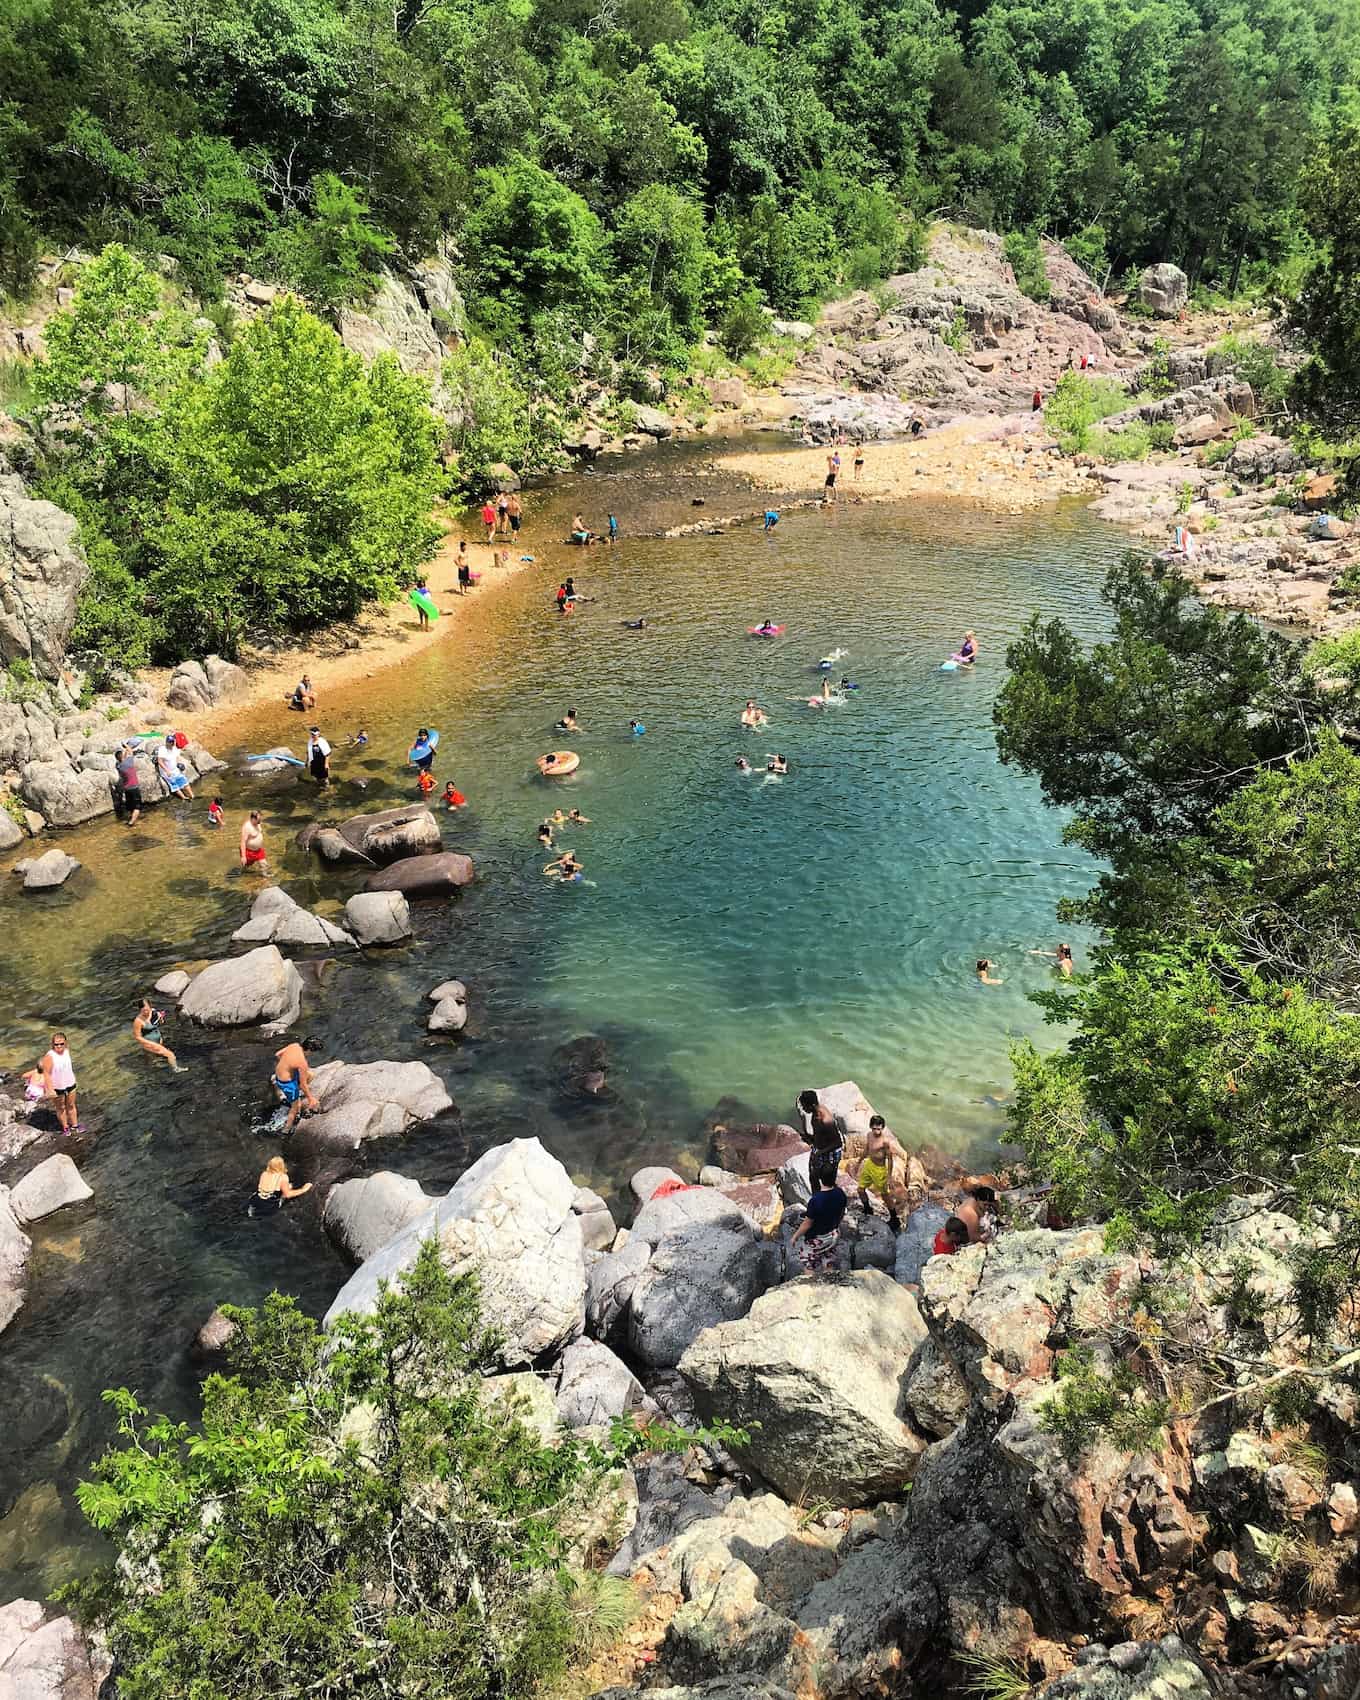 Aerial image of blue waters with a group of people wading and soaking.